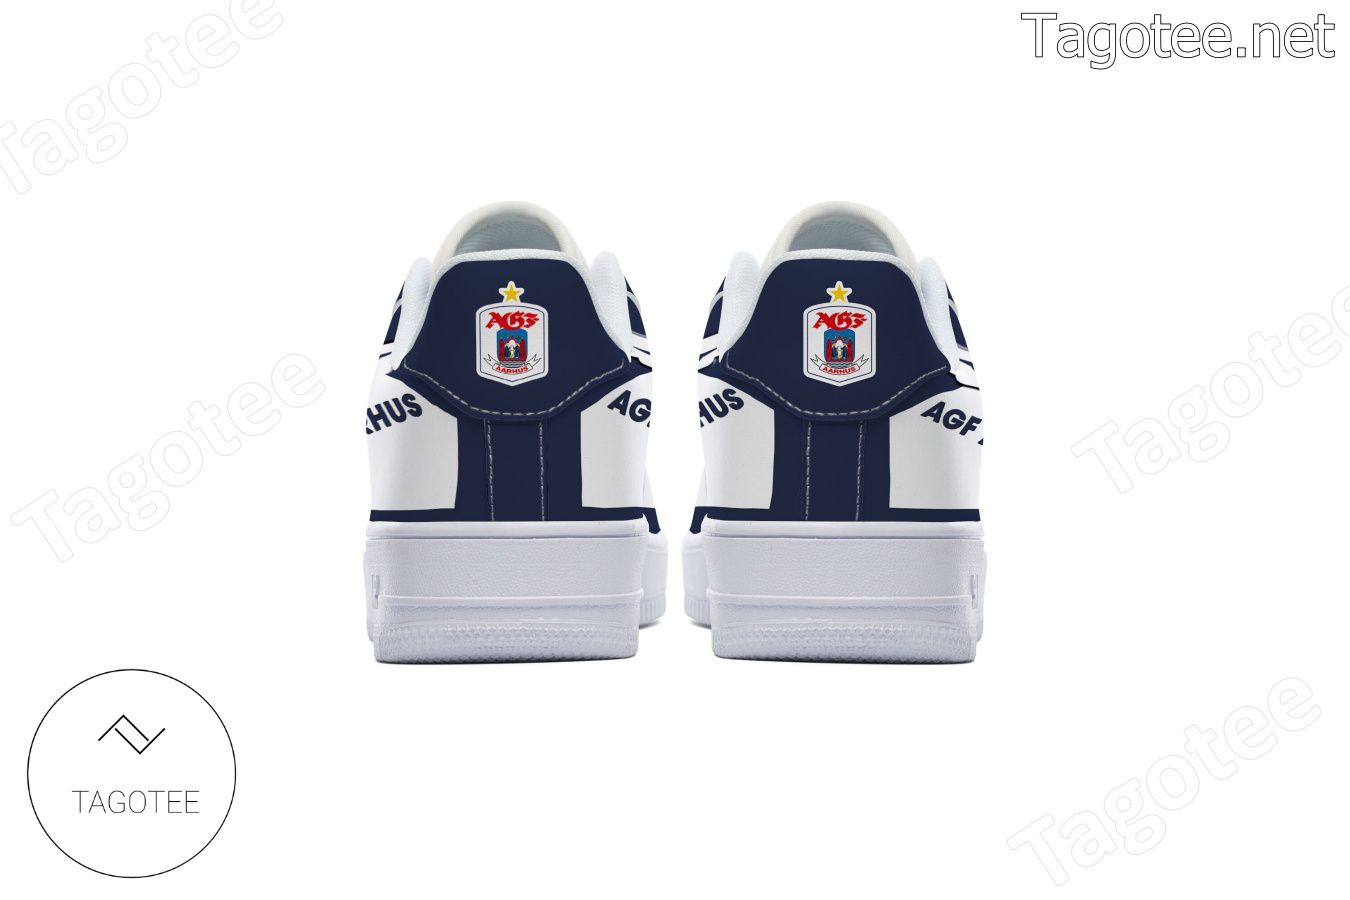 AGF Fodbold Logo Air Force 1 Shoes a